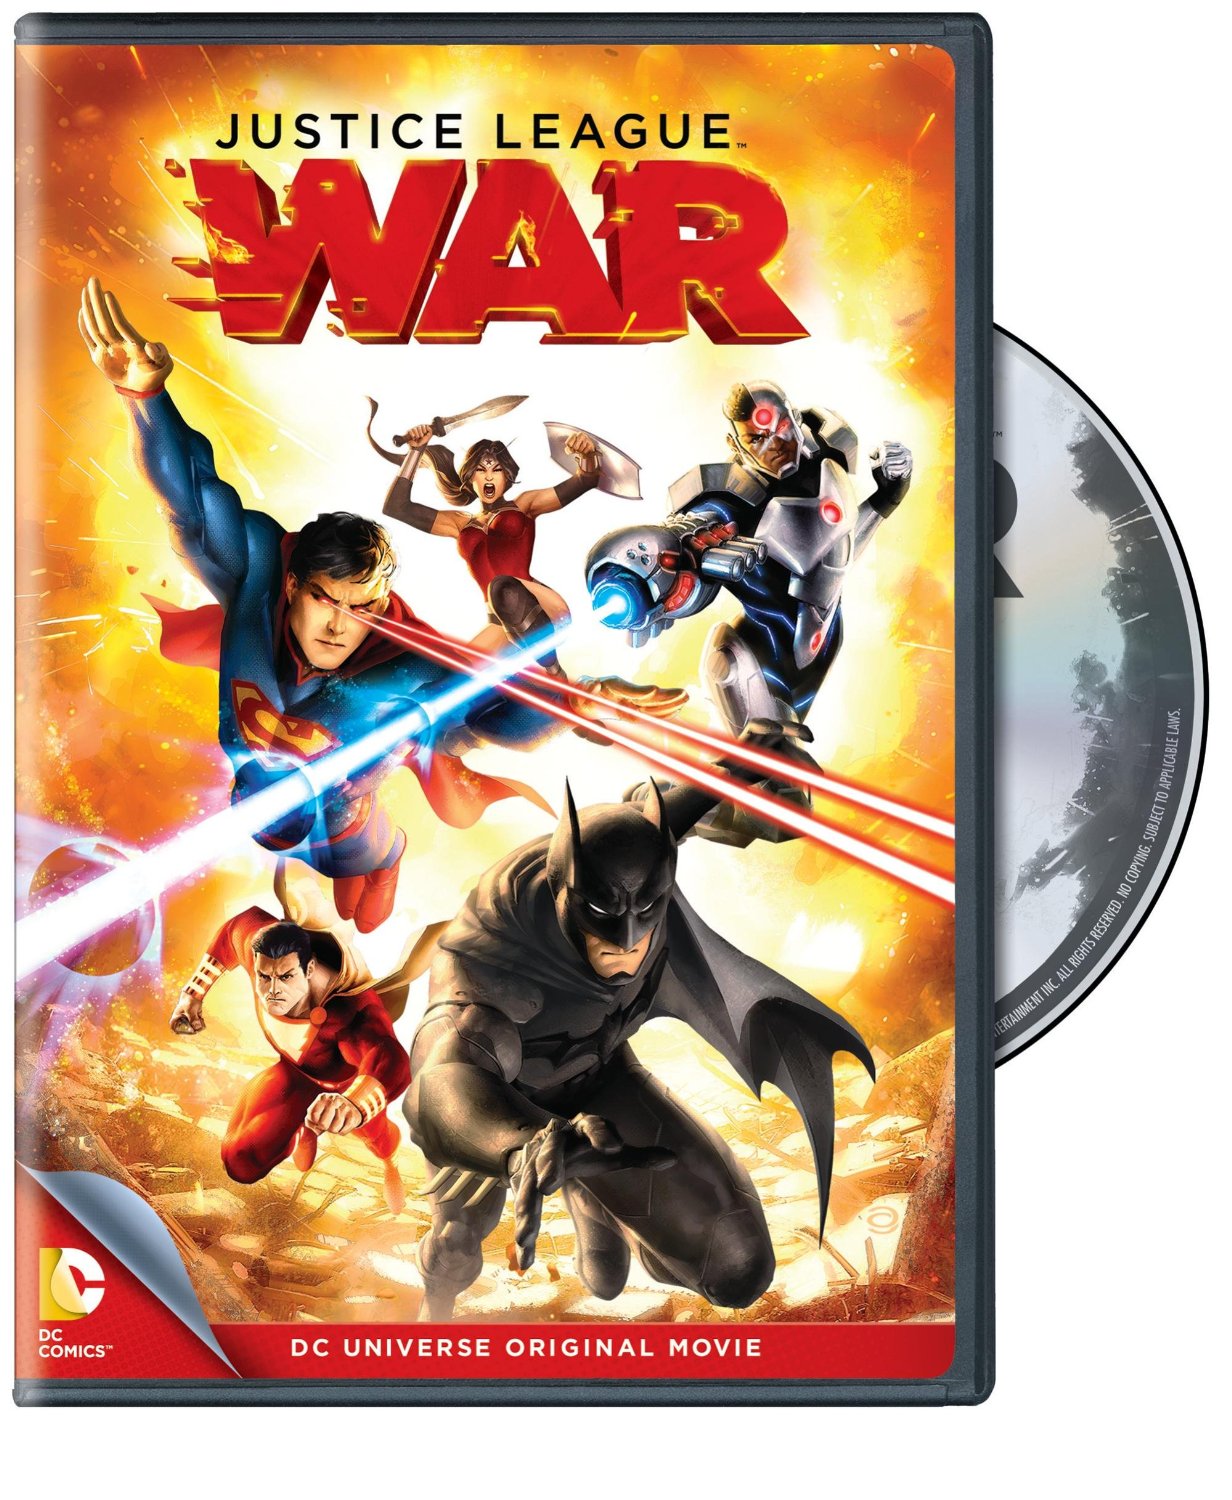 Justice League: War - a revamped origin for the Justice League, starring Superman, Batman, Wonder Woman, Captain Marvel (Shazam), the Flash, Green Lantern and Cyborg